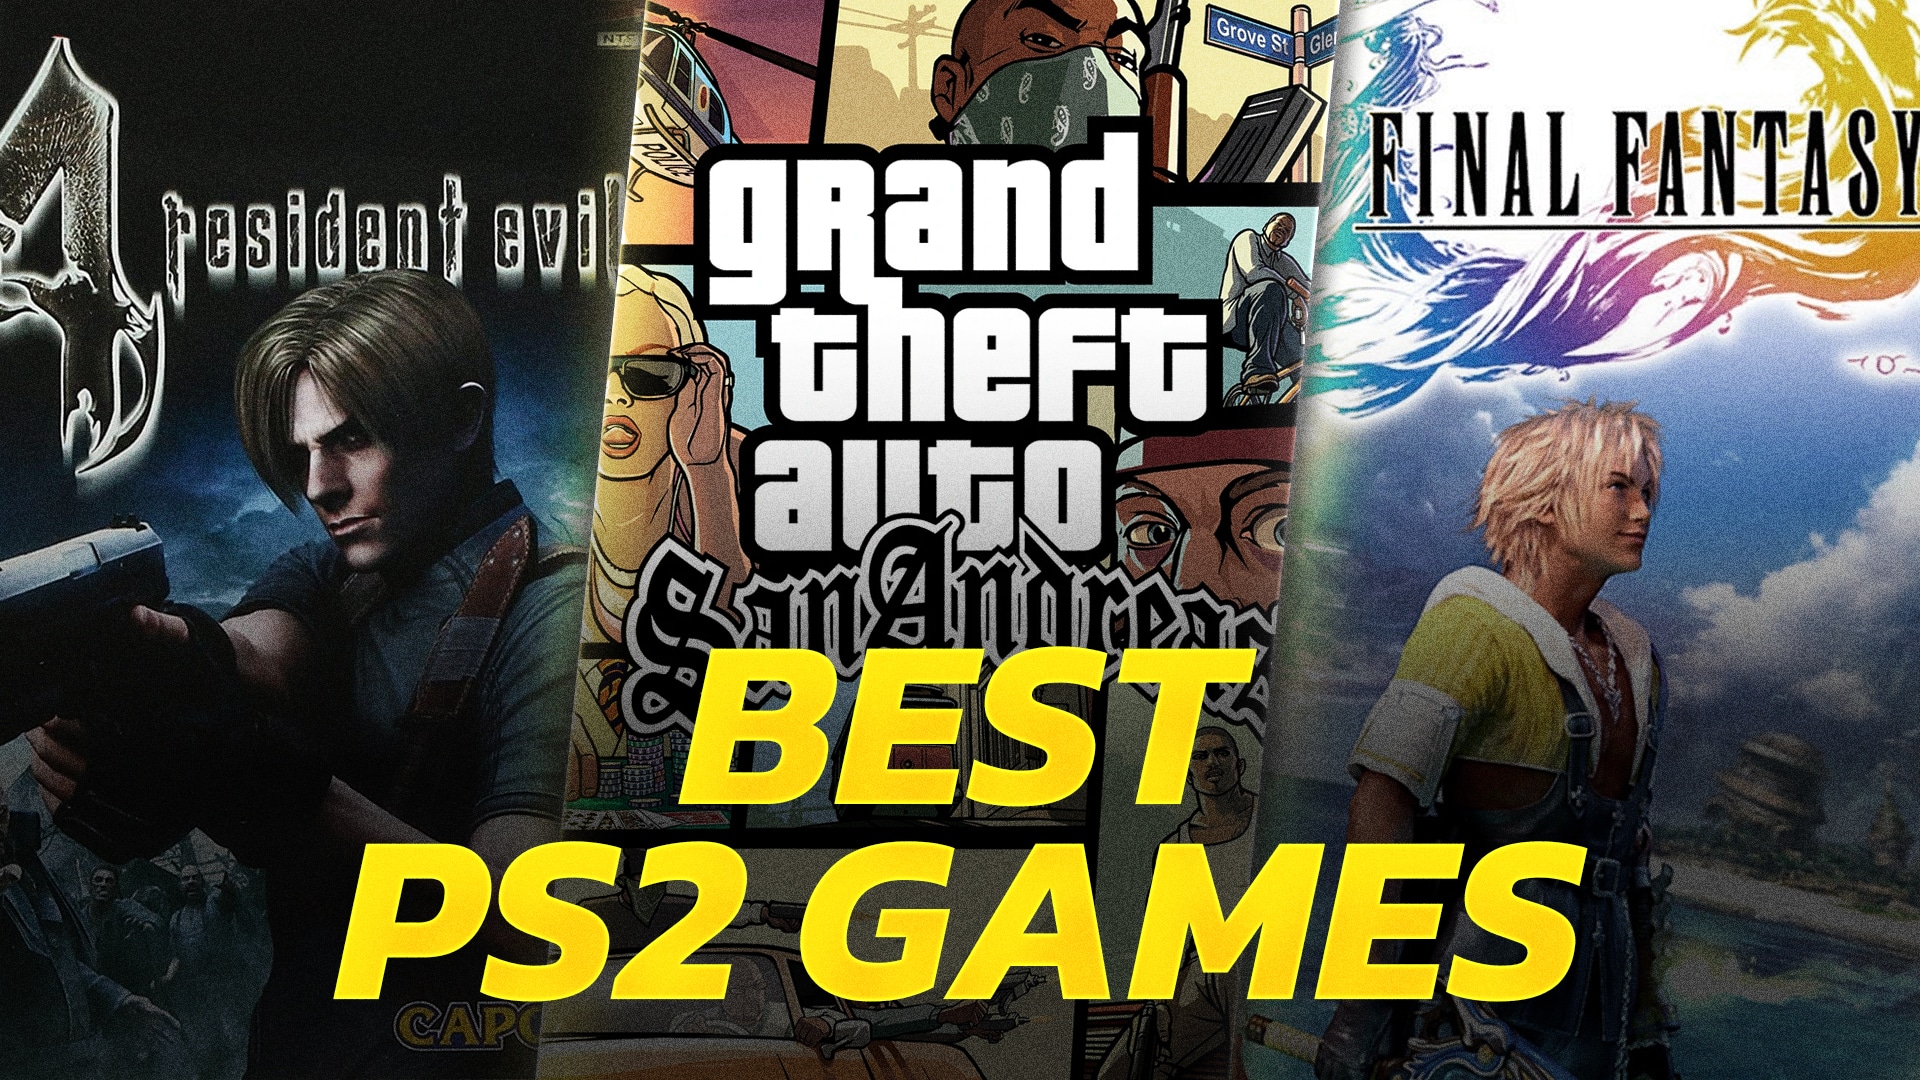 Best 2 games of all time: 15 PS2 games ranked - Dexerto